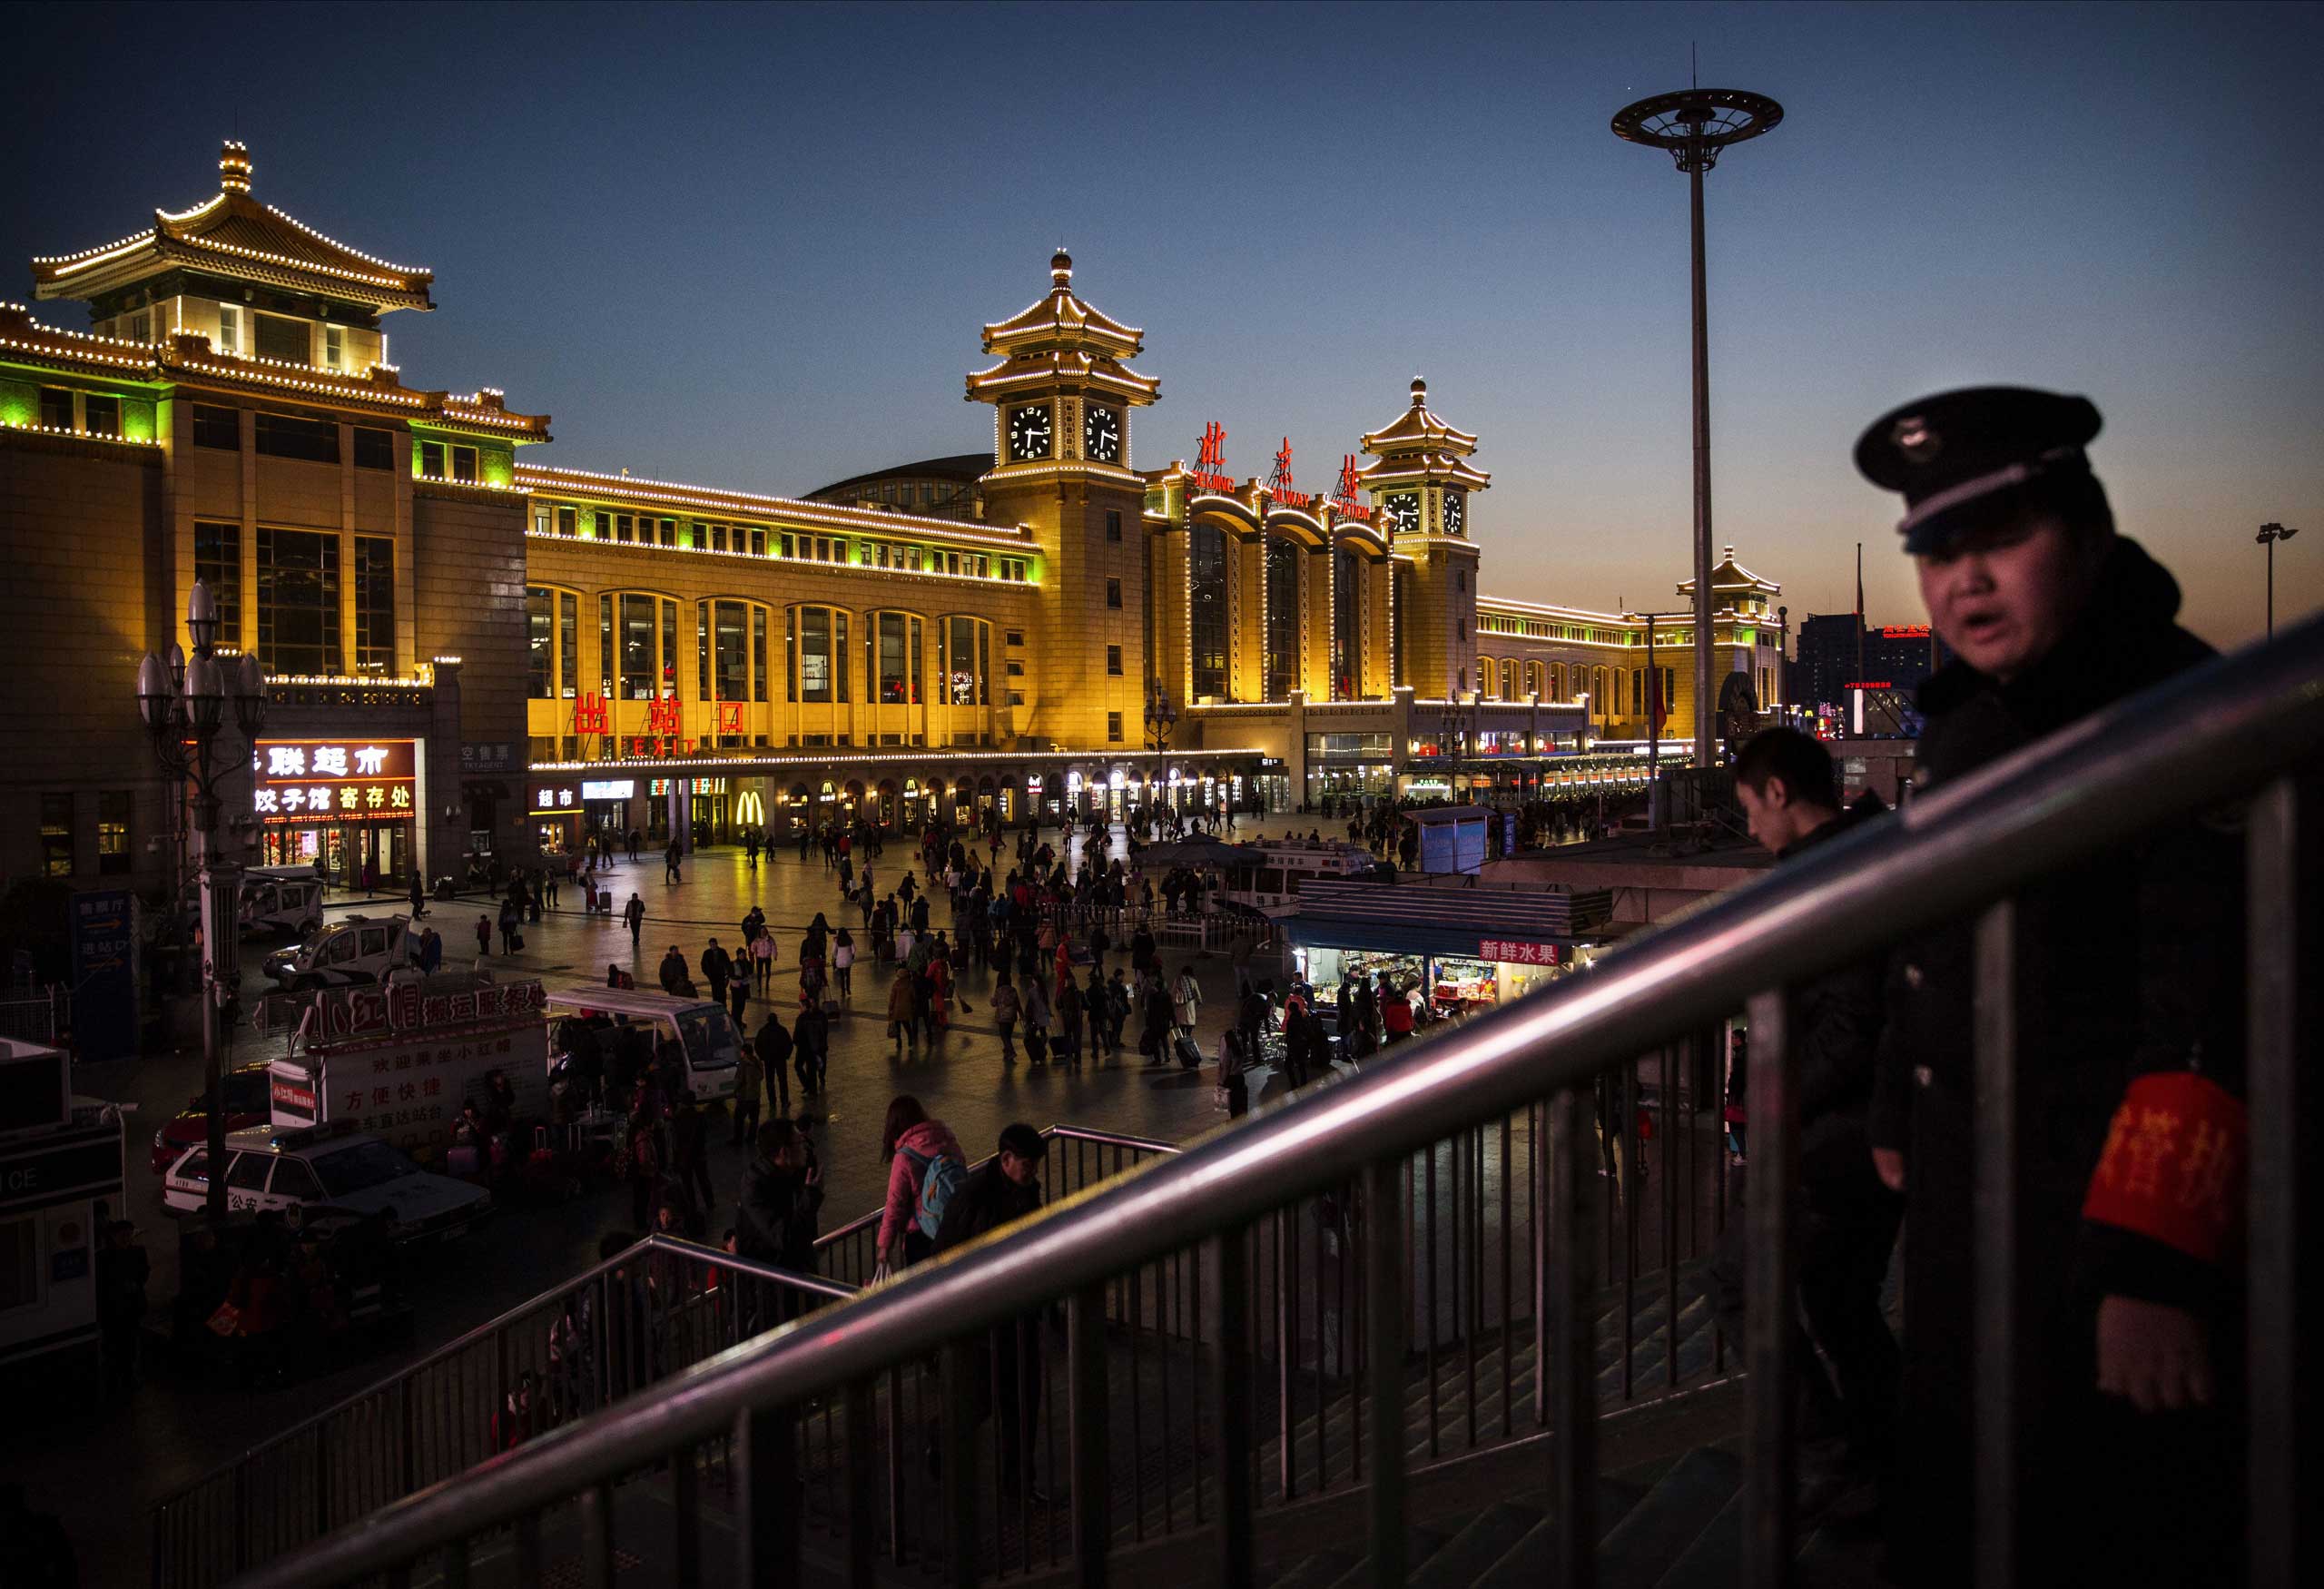 A security guard watches over passengers leaving for the Spring Festival at a local railway station on Feb. 17, 2015 in Beijing.